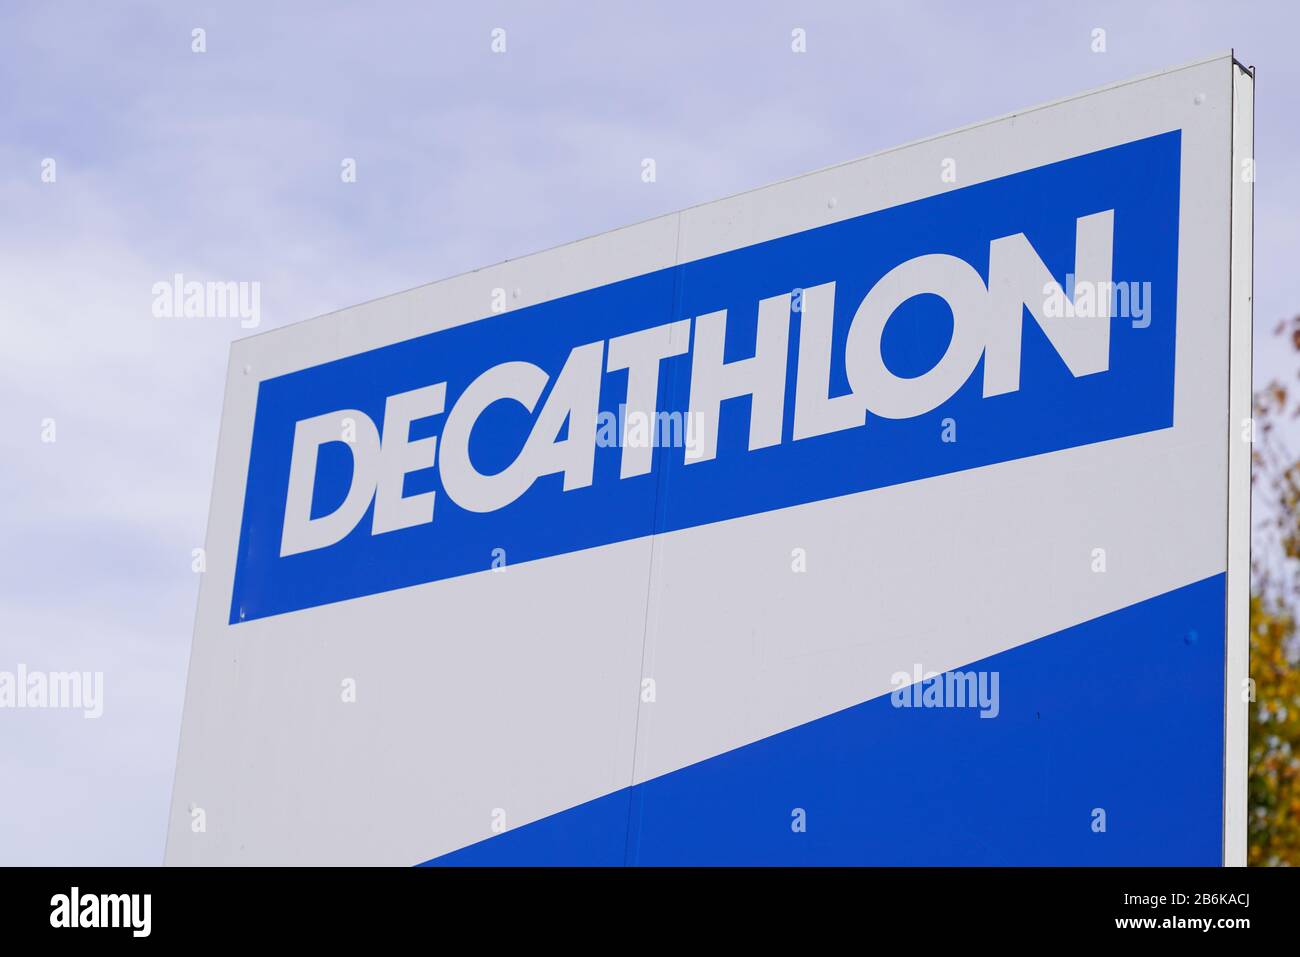 Bordeaux , Aquitaine / France - 10 27 2019 : Decathlon sign logo store French shop sporting goods retailer brand Stock Photo